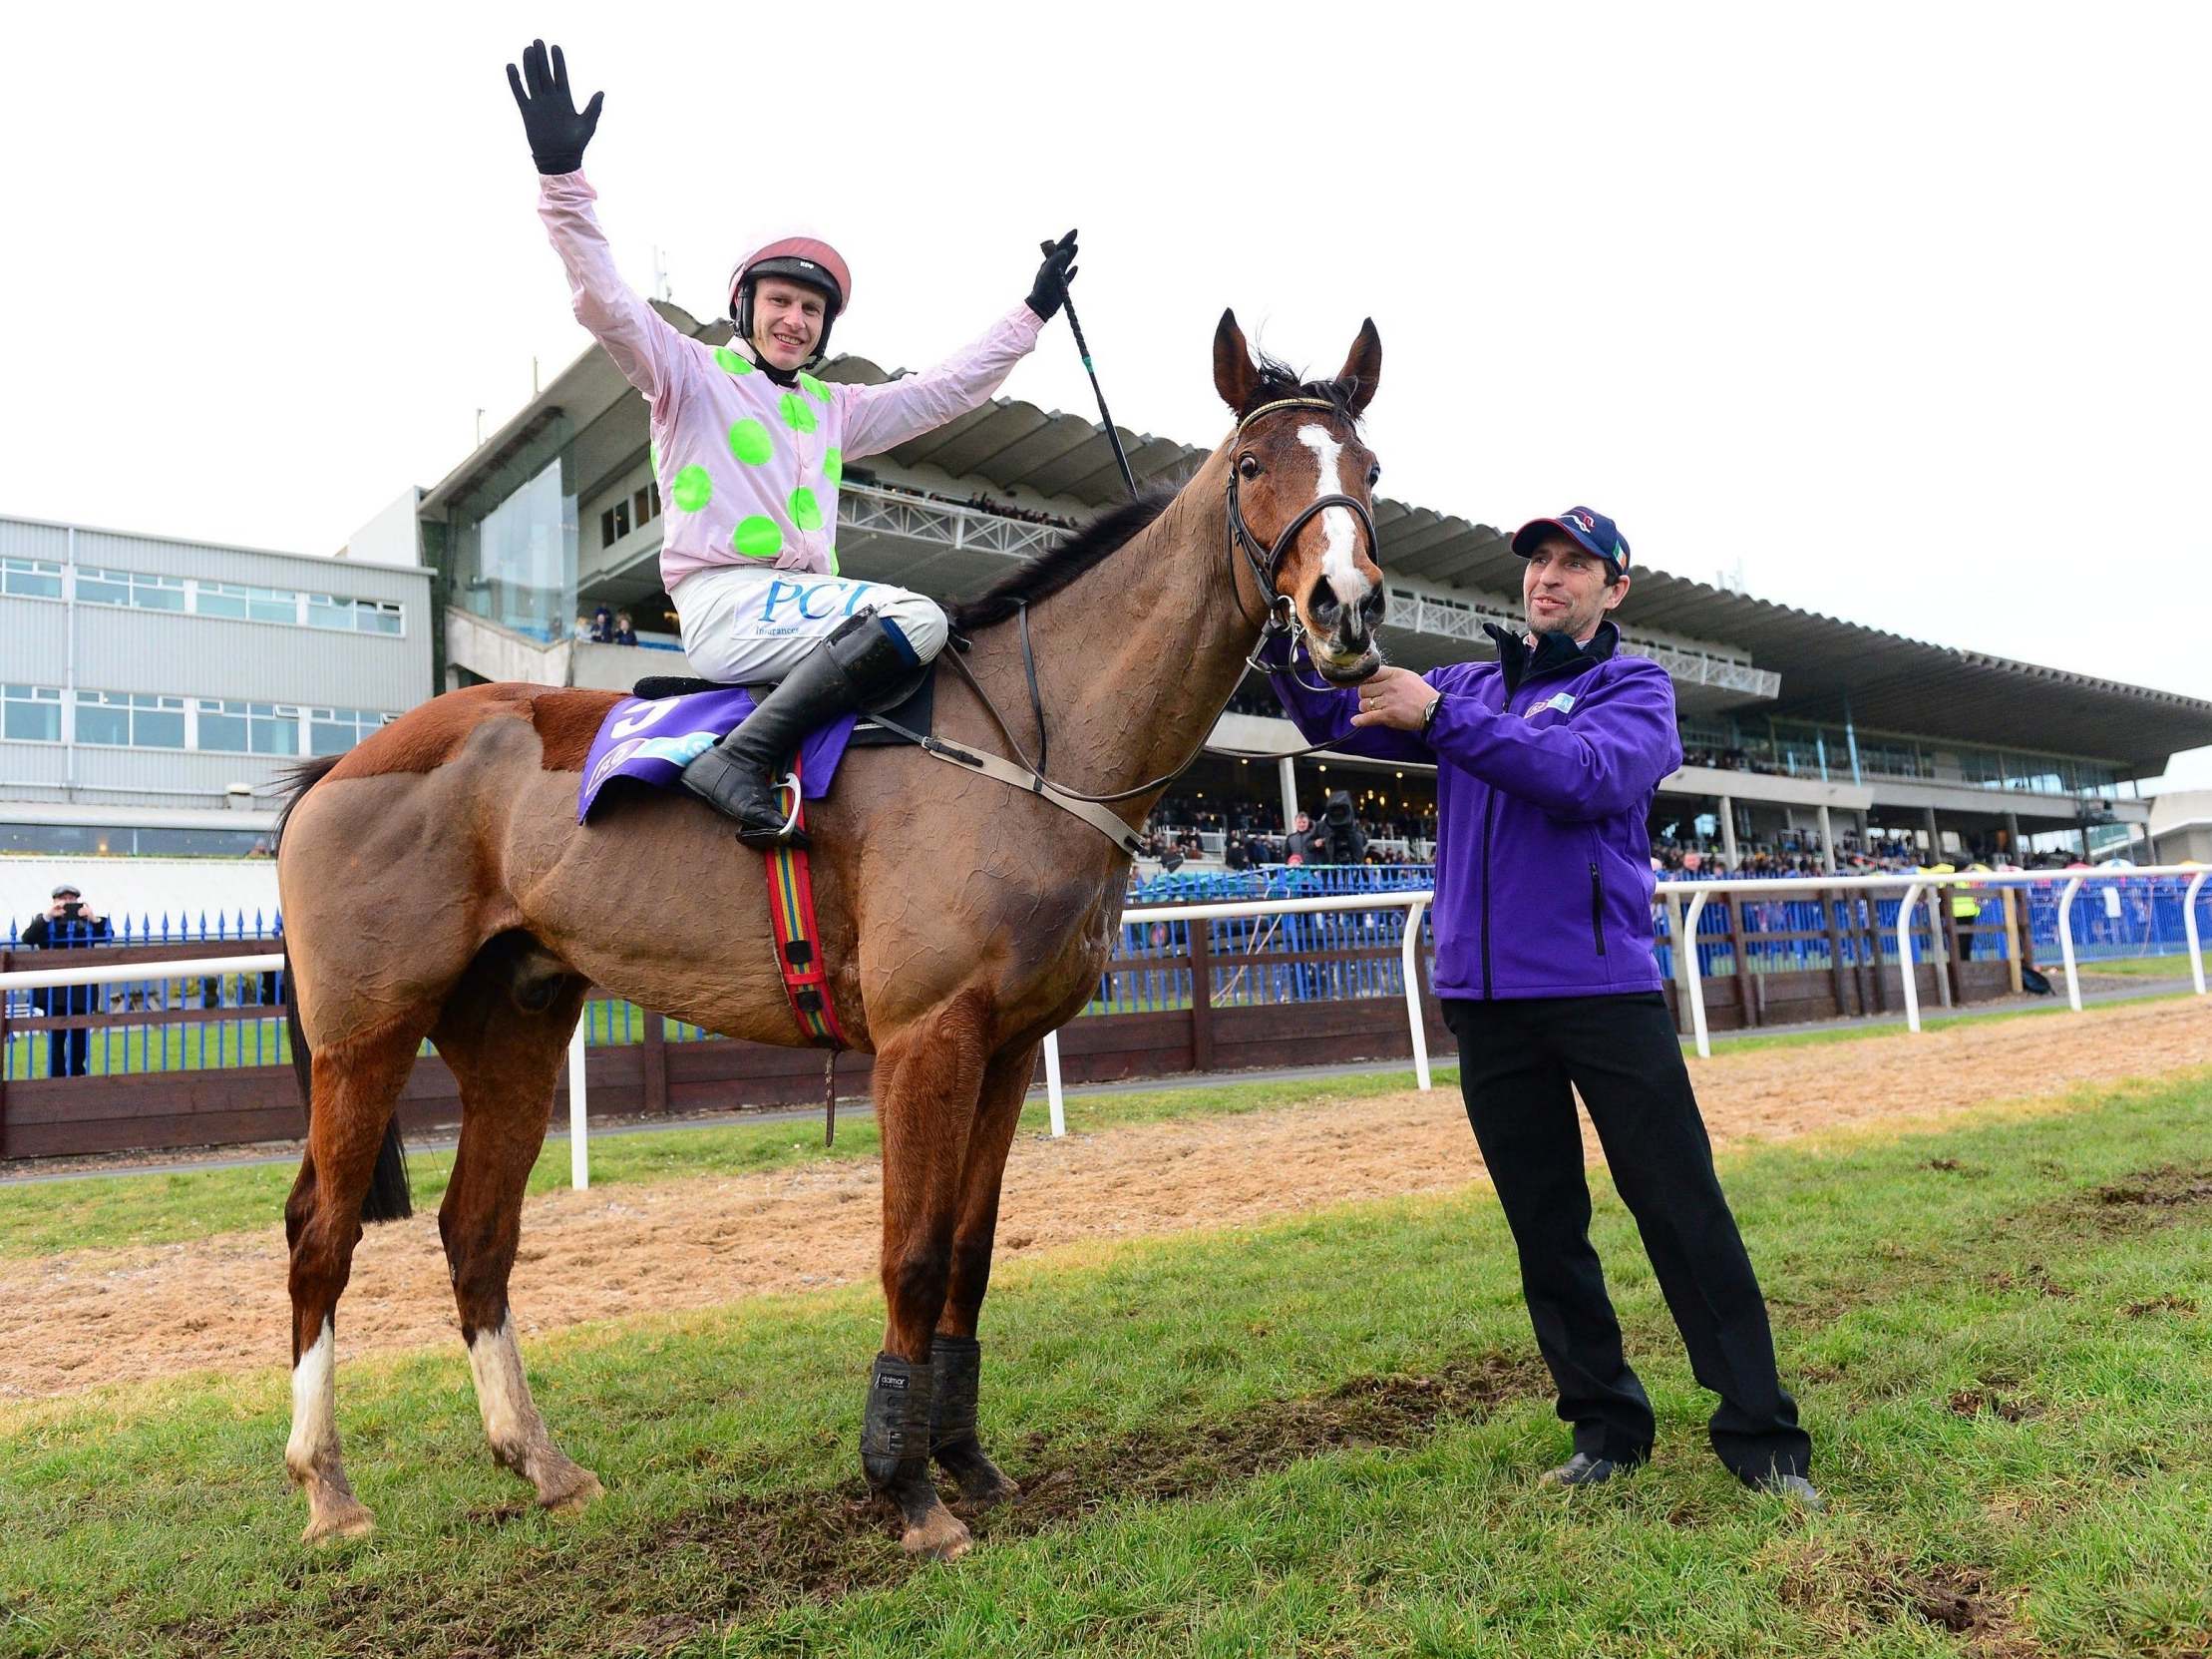 Faugheen and Paul Townend with groom John Codd celebrate after The Flogas Novice Chase